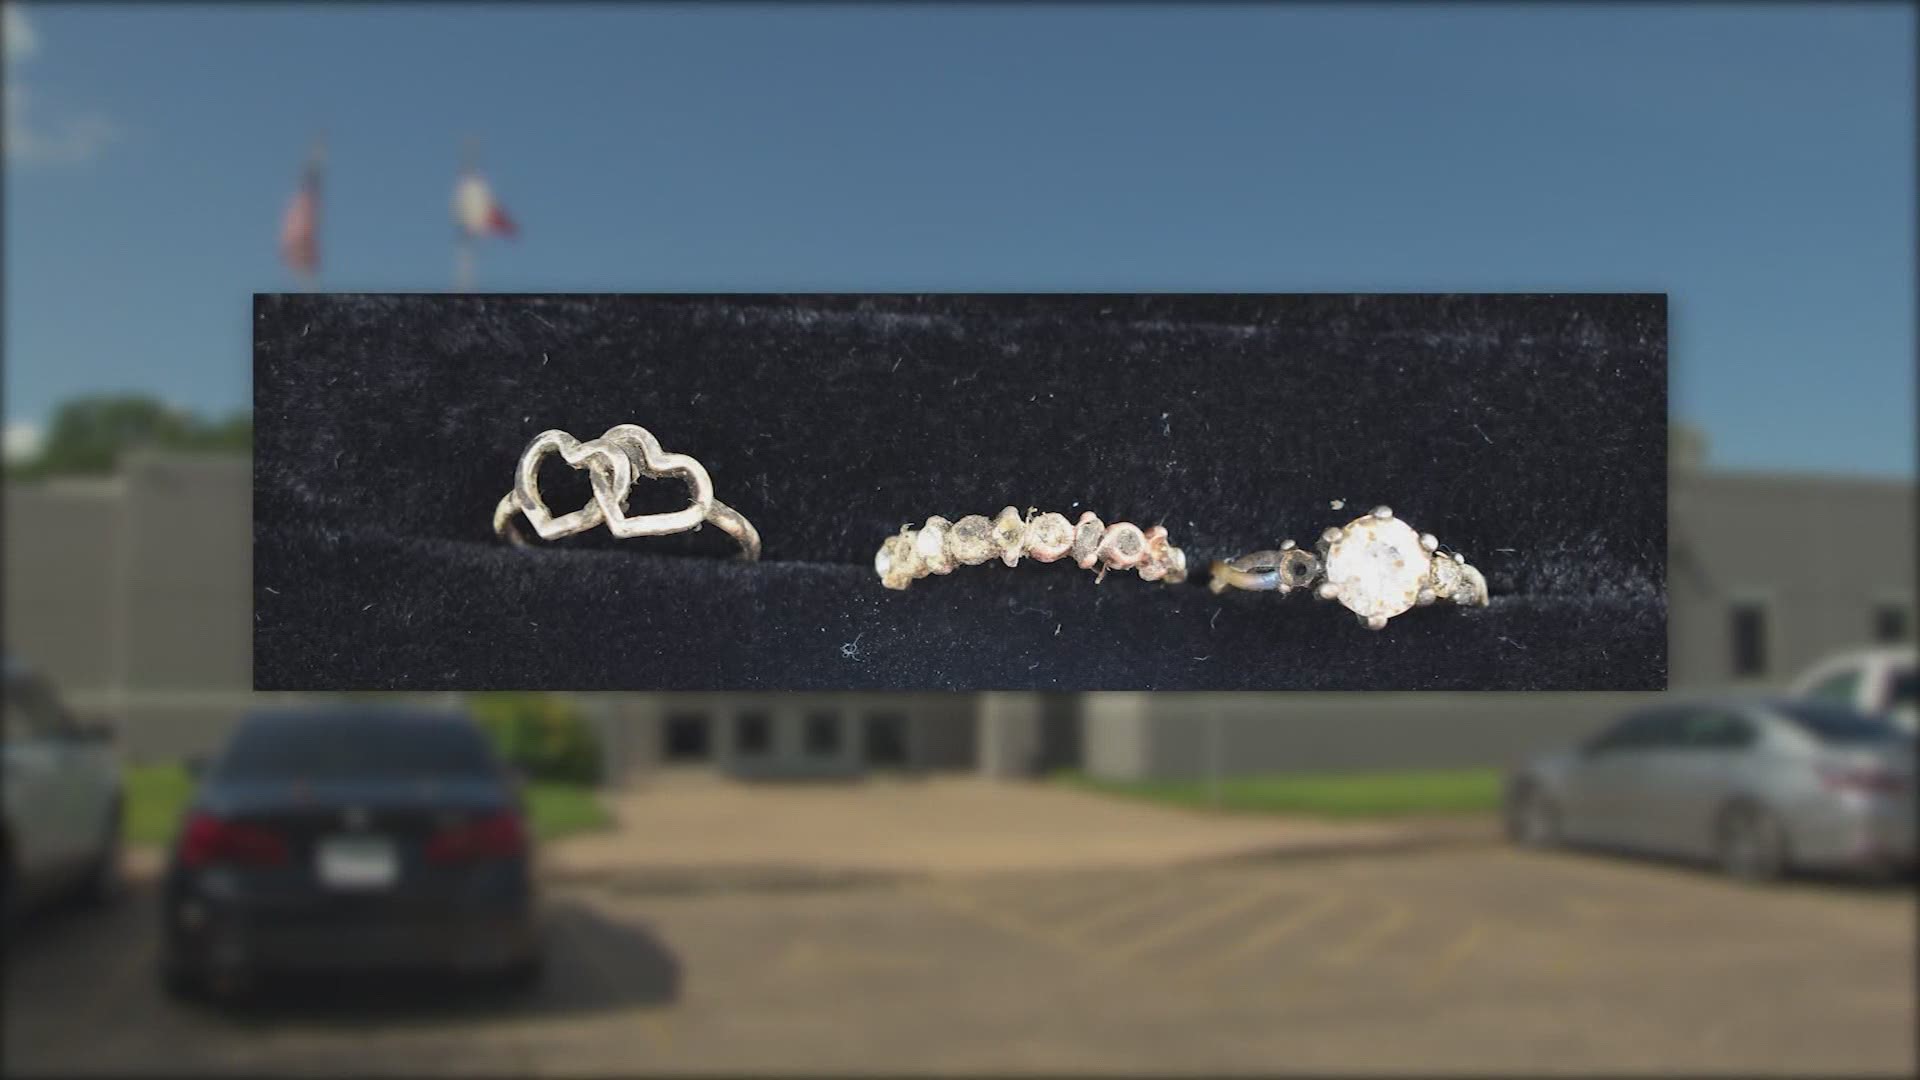 Deputies released photographs of jewelry found on a girl’s remains along with a description of what she was wearing in hopes someone can identify her.